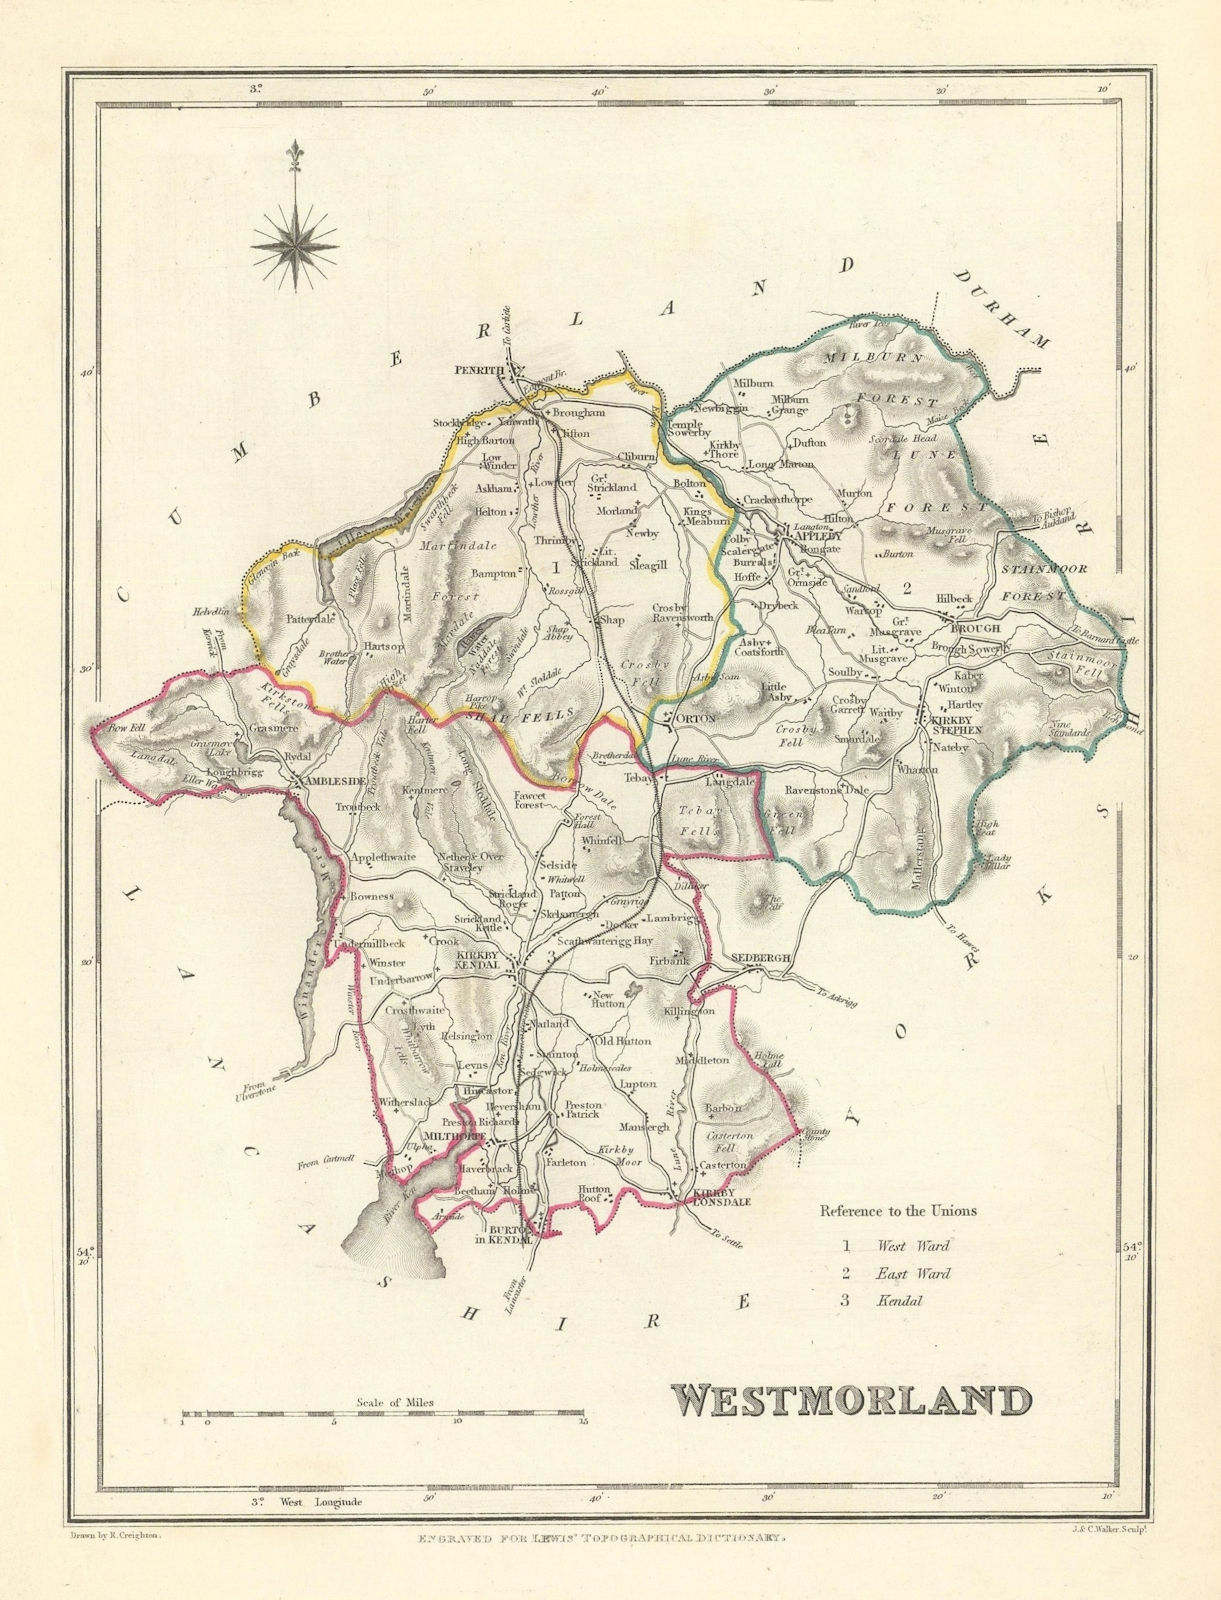 Associate Product Antique county map of WESTMORLAND by Creighton Walker Lewis. Lake District c1840